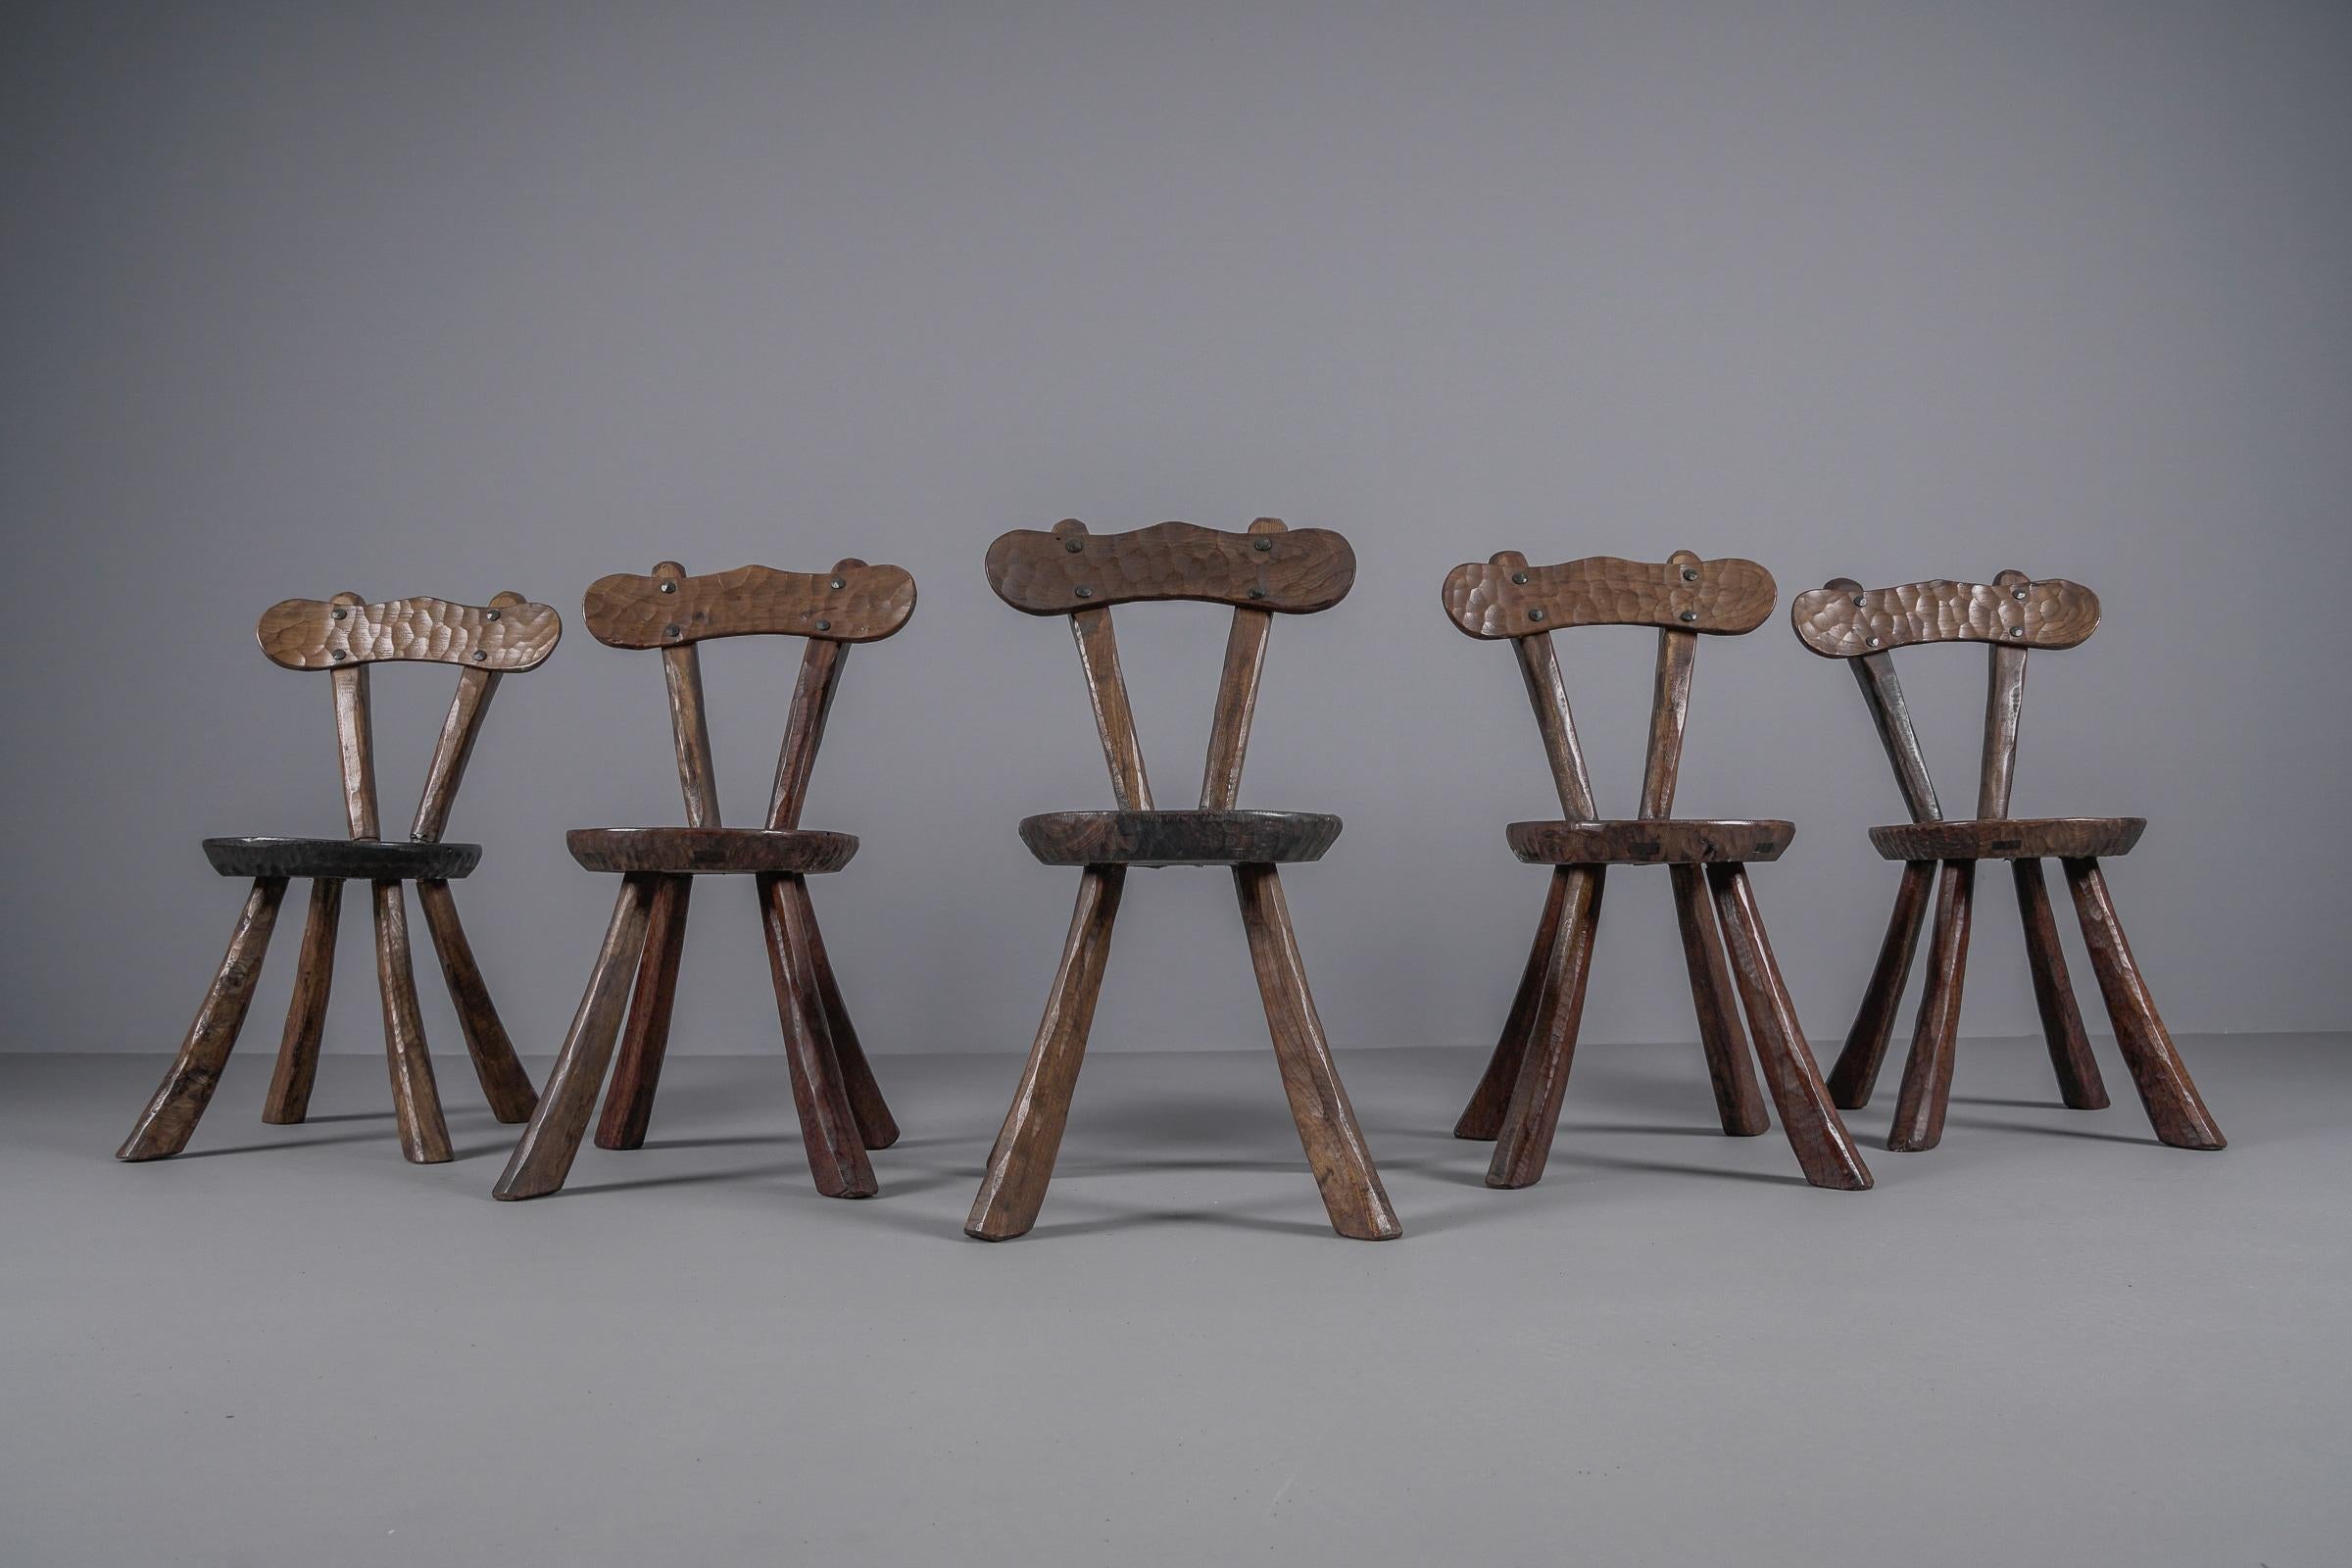 Brutalist rustic modern sculptured chairs in elm in the style of Alexandre Noll

Here are sold the five chairs in the set.

Only the chairs alone are sold here, the coffee table is in another offer.
Edit Description